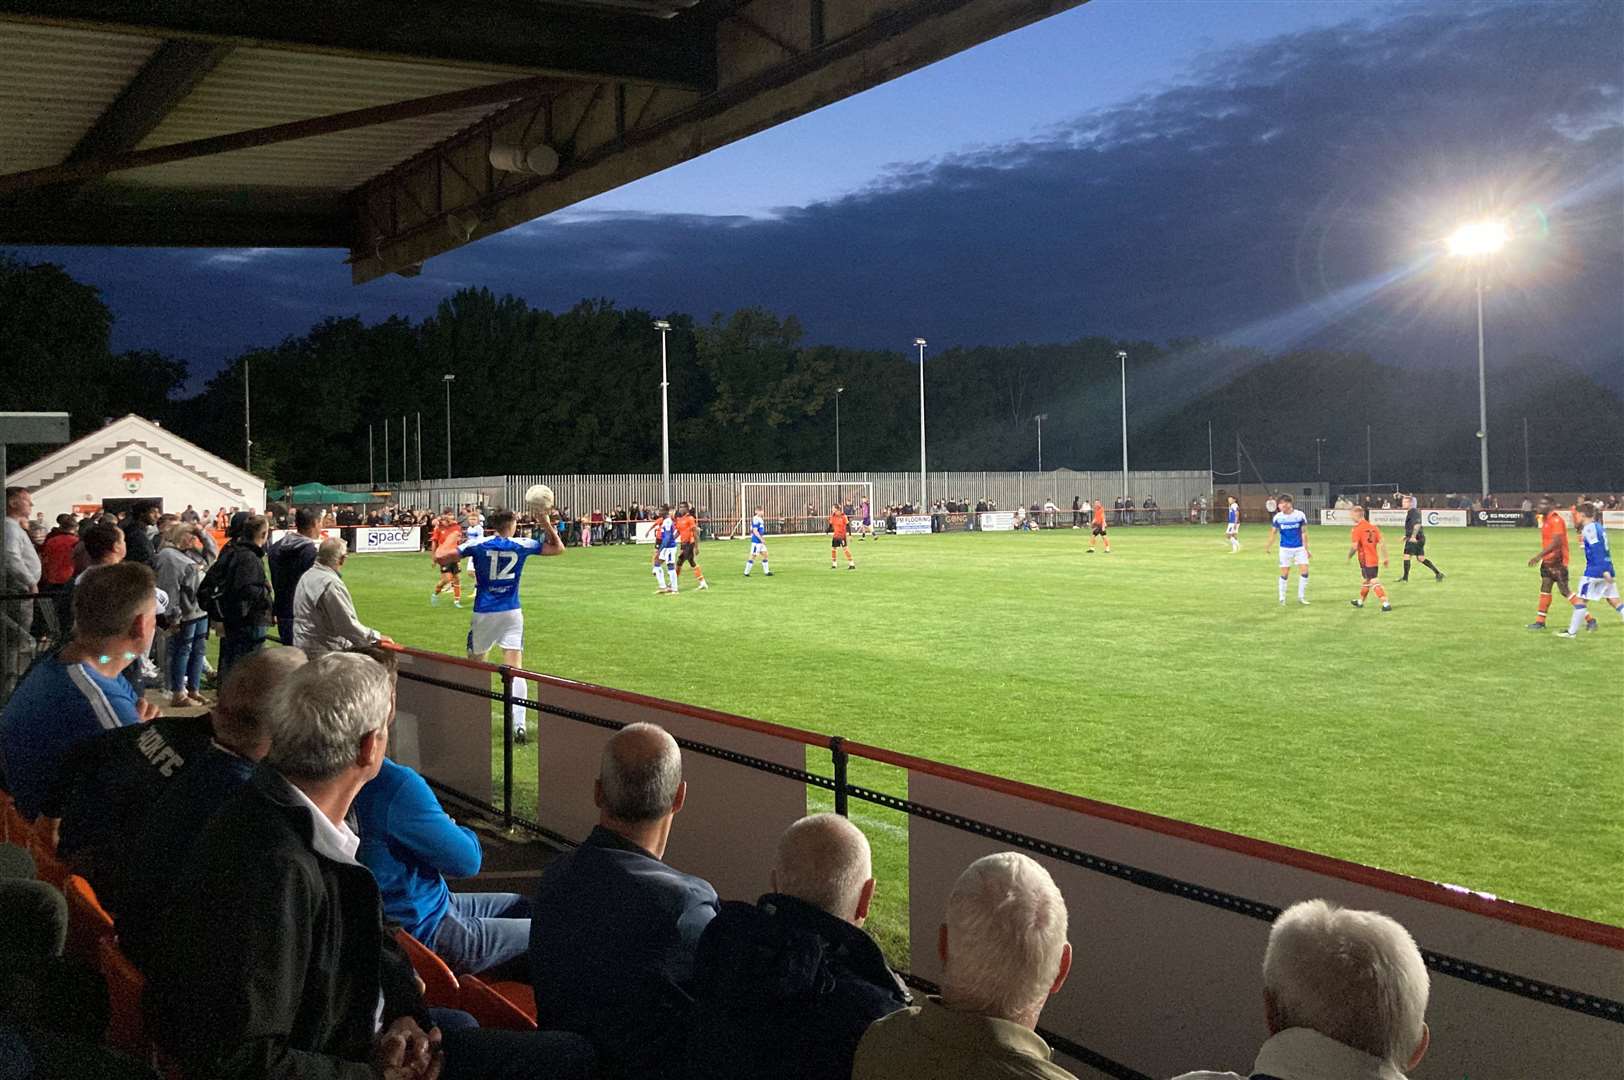 A crowd of over 500 watched Gillingham against Lordswood at Martyn Grove on Tuesday night